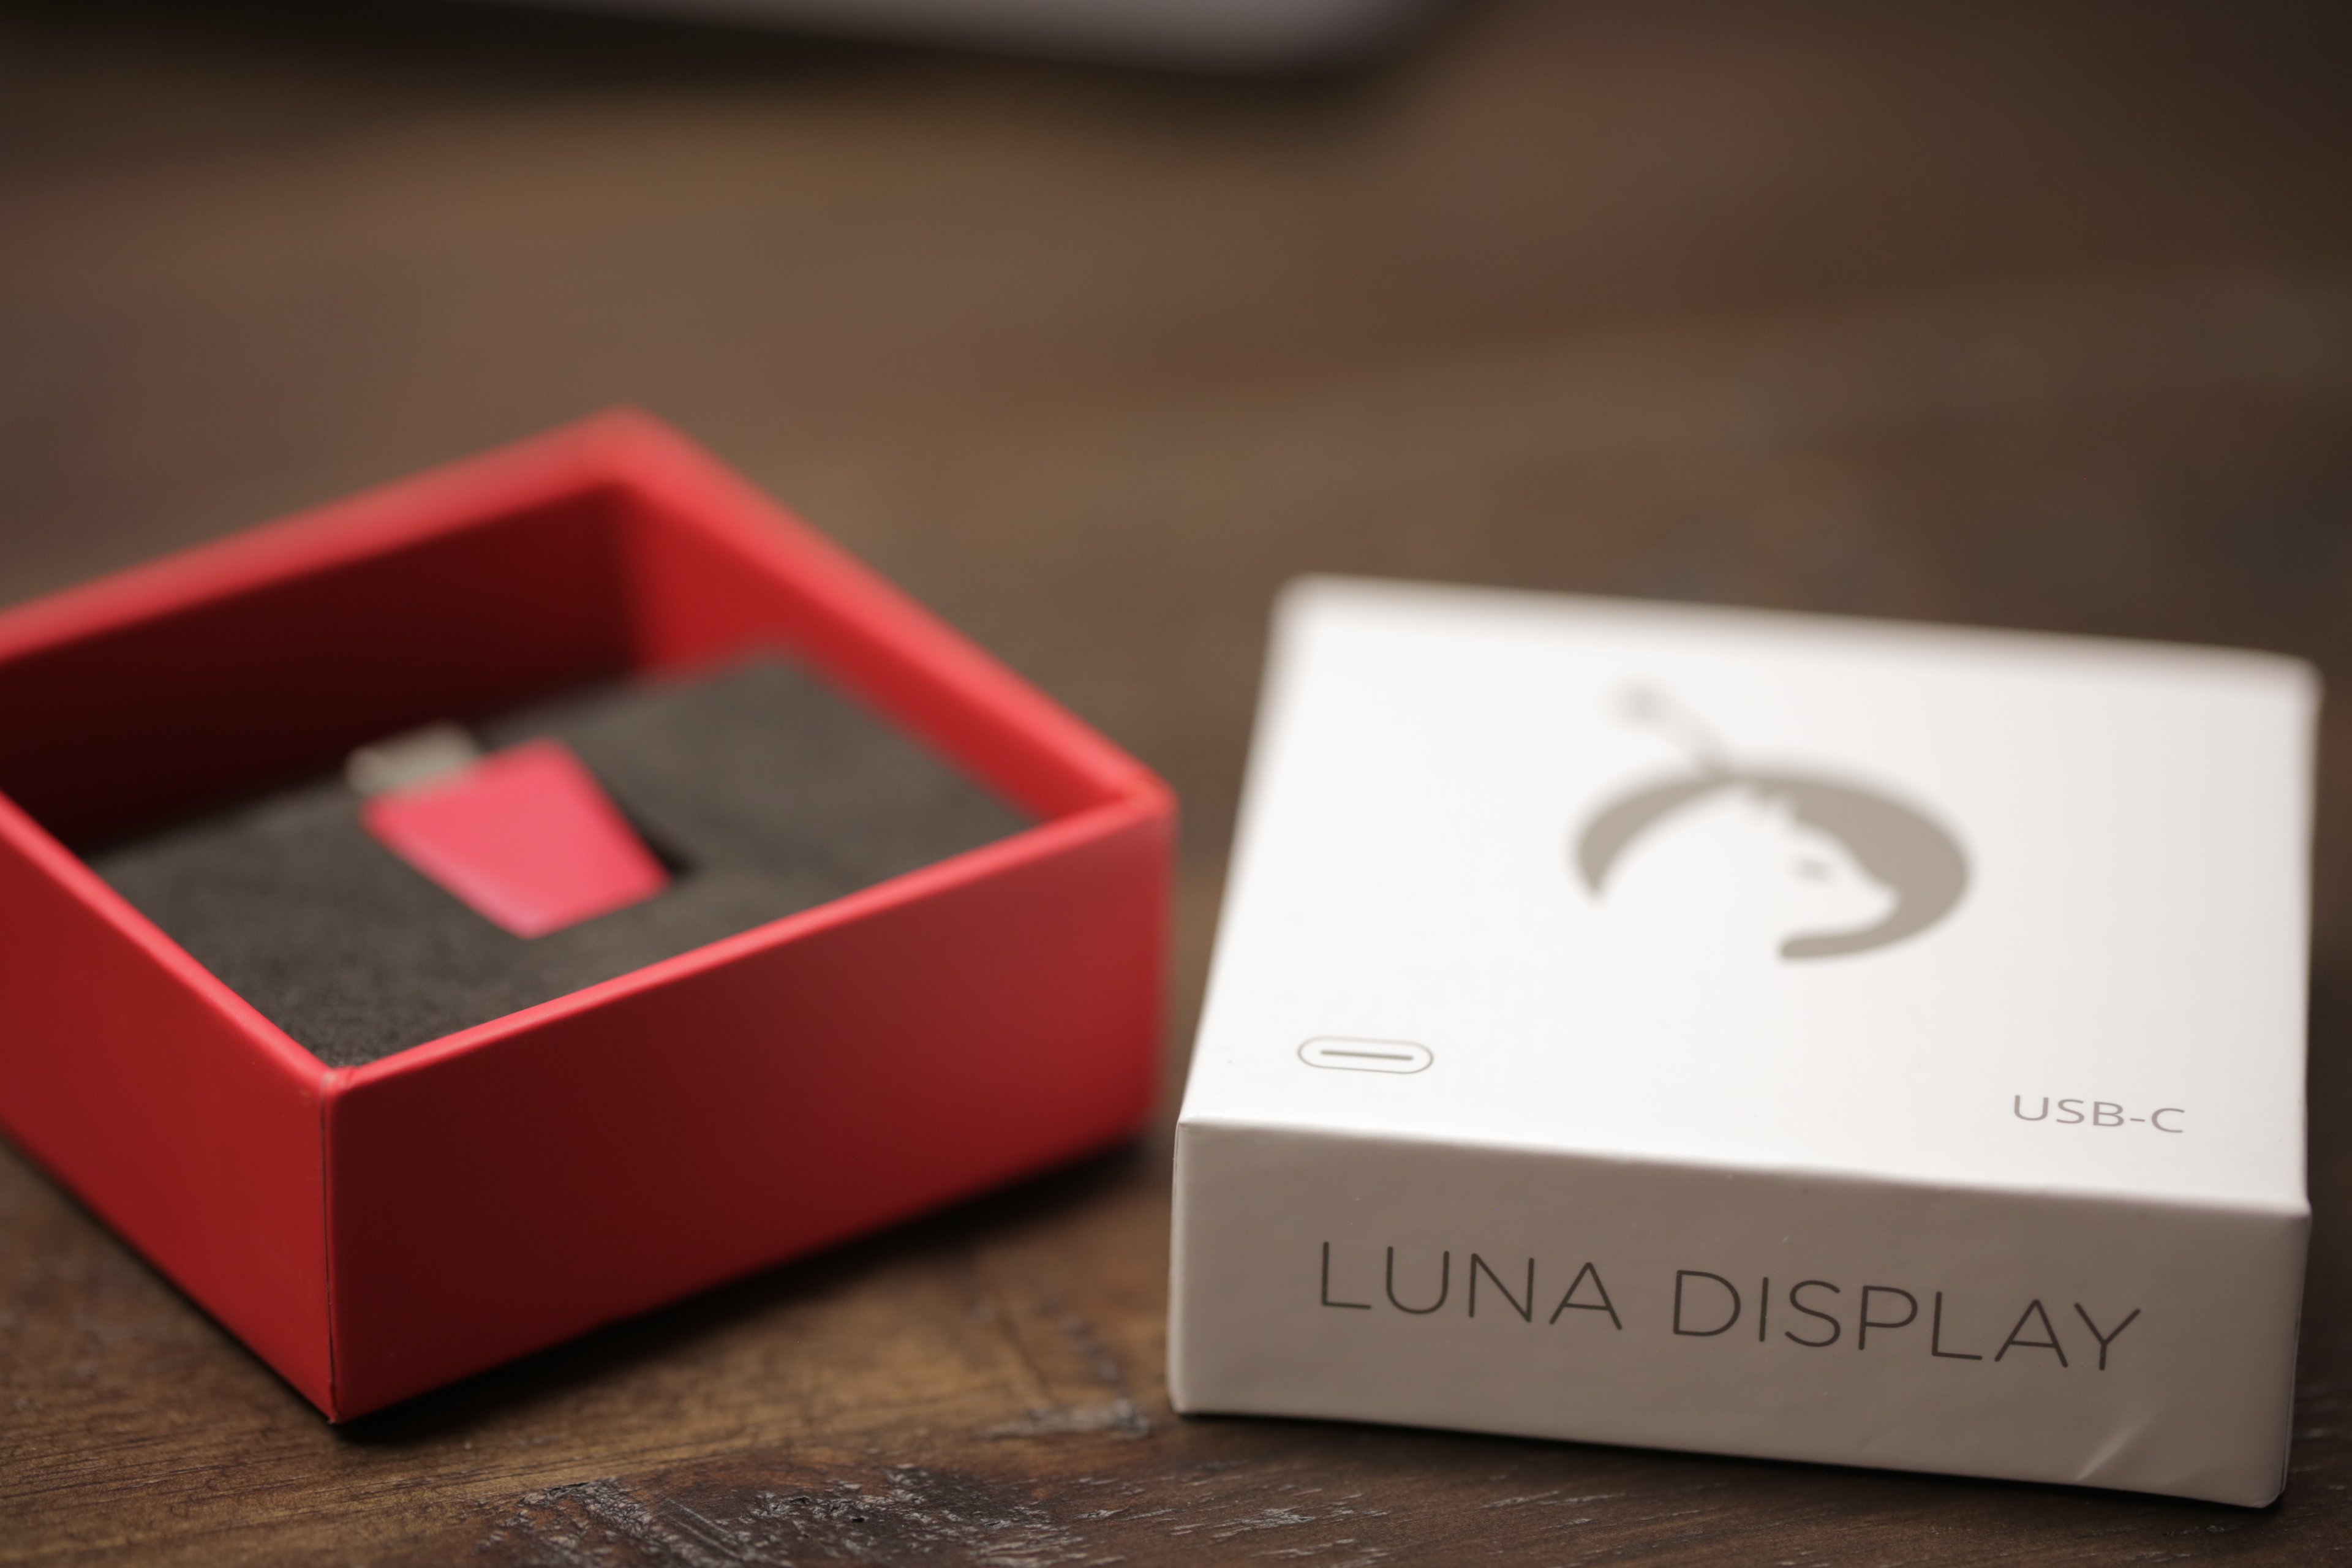 The Luna wireless portable iPad display adapter is now available